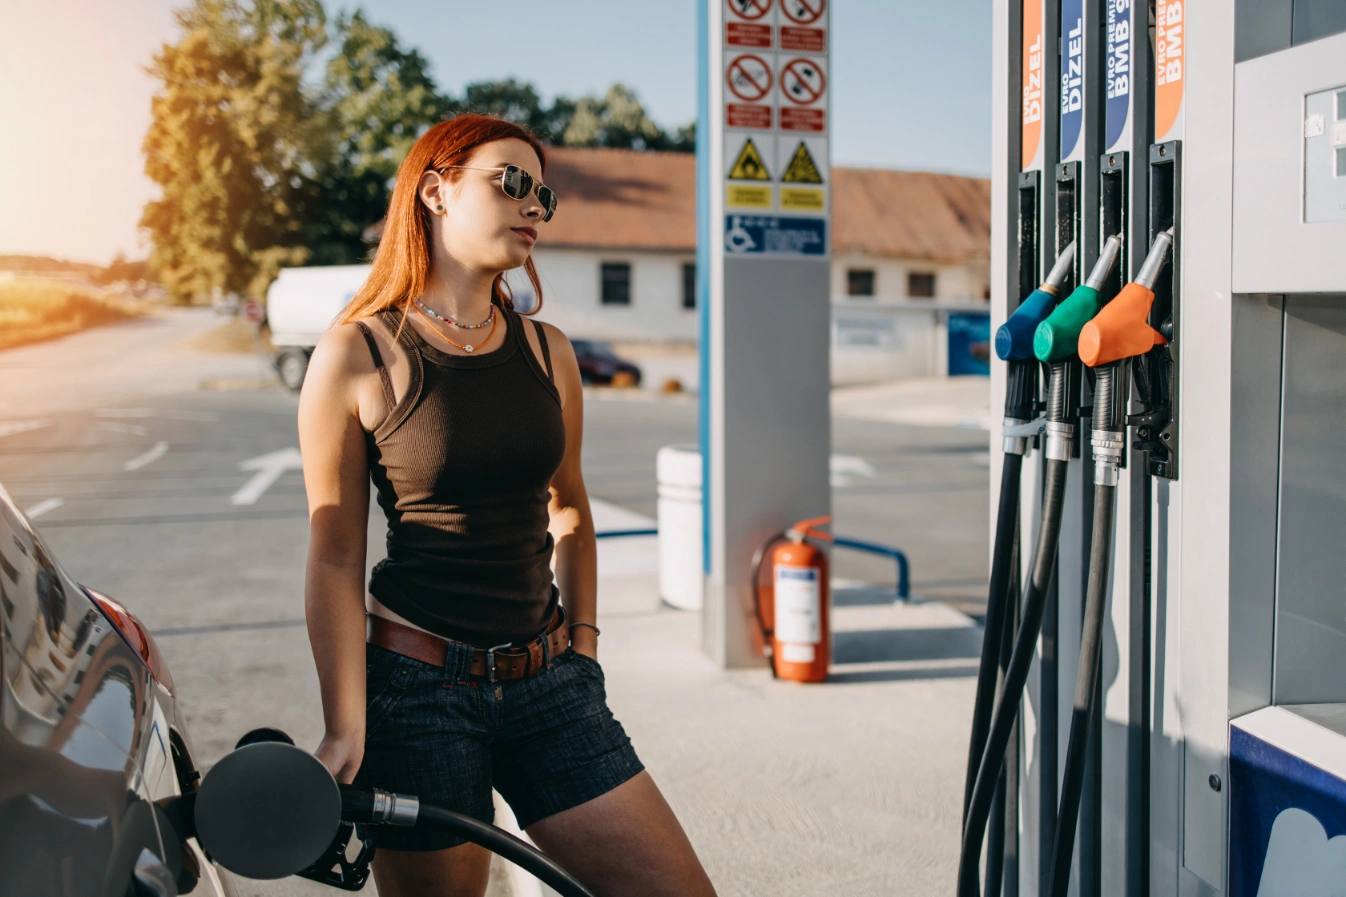 Best Gas Stations That Cash Checks: 2023